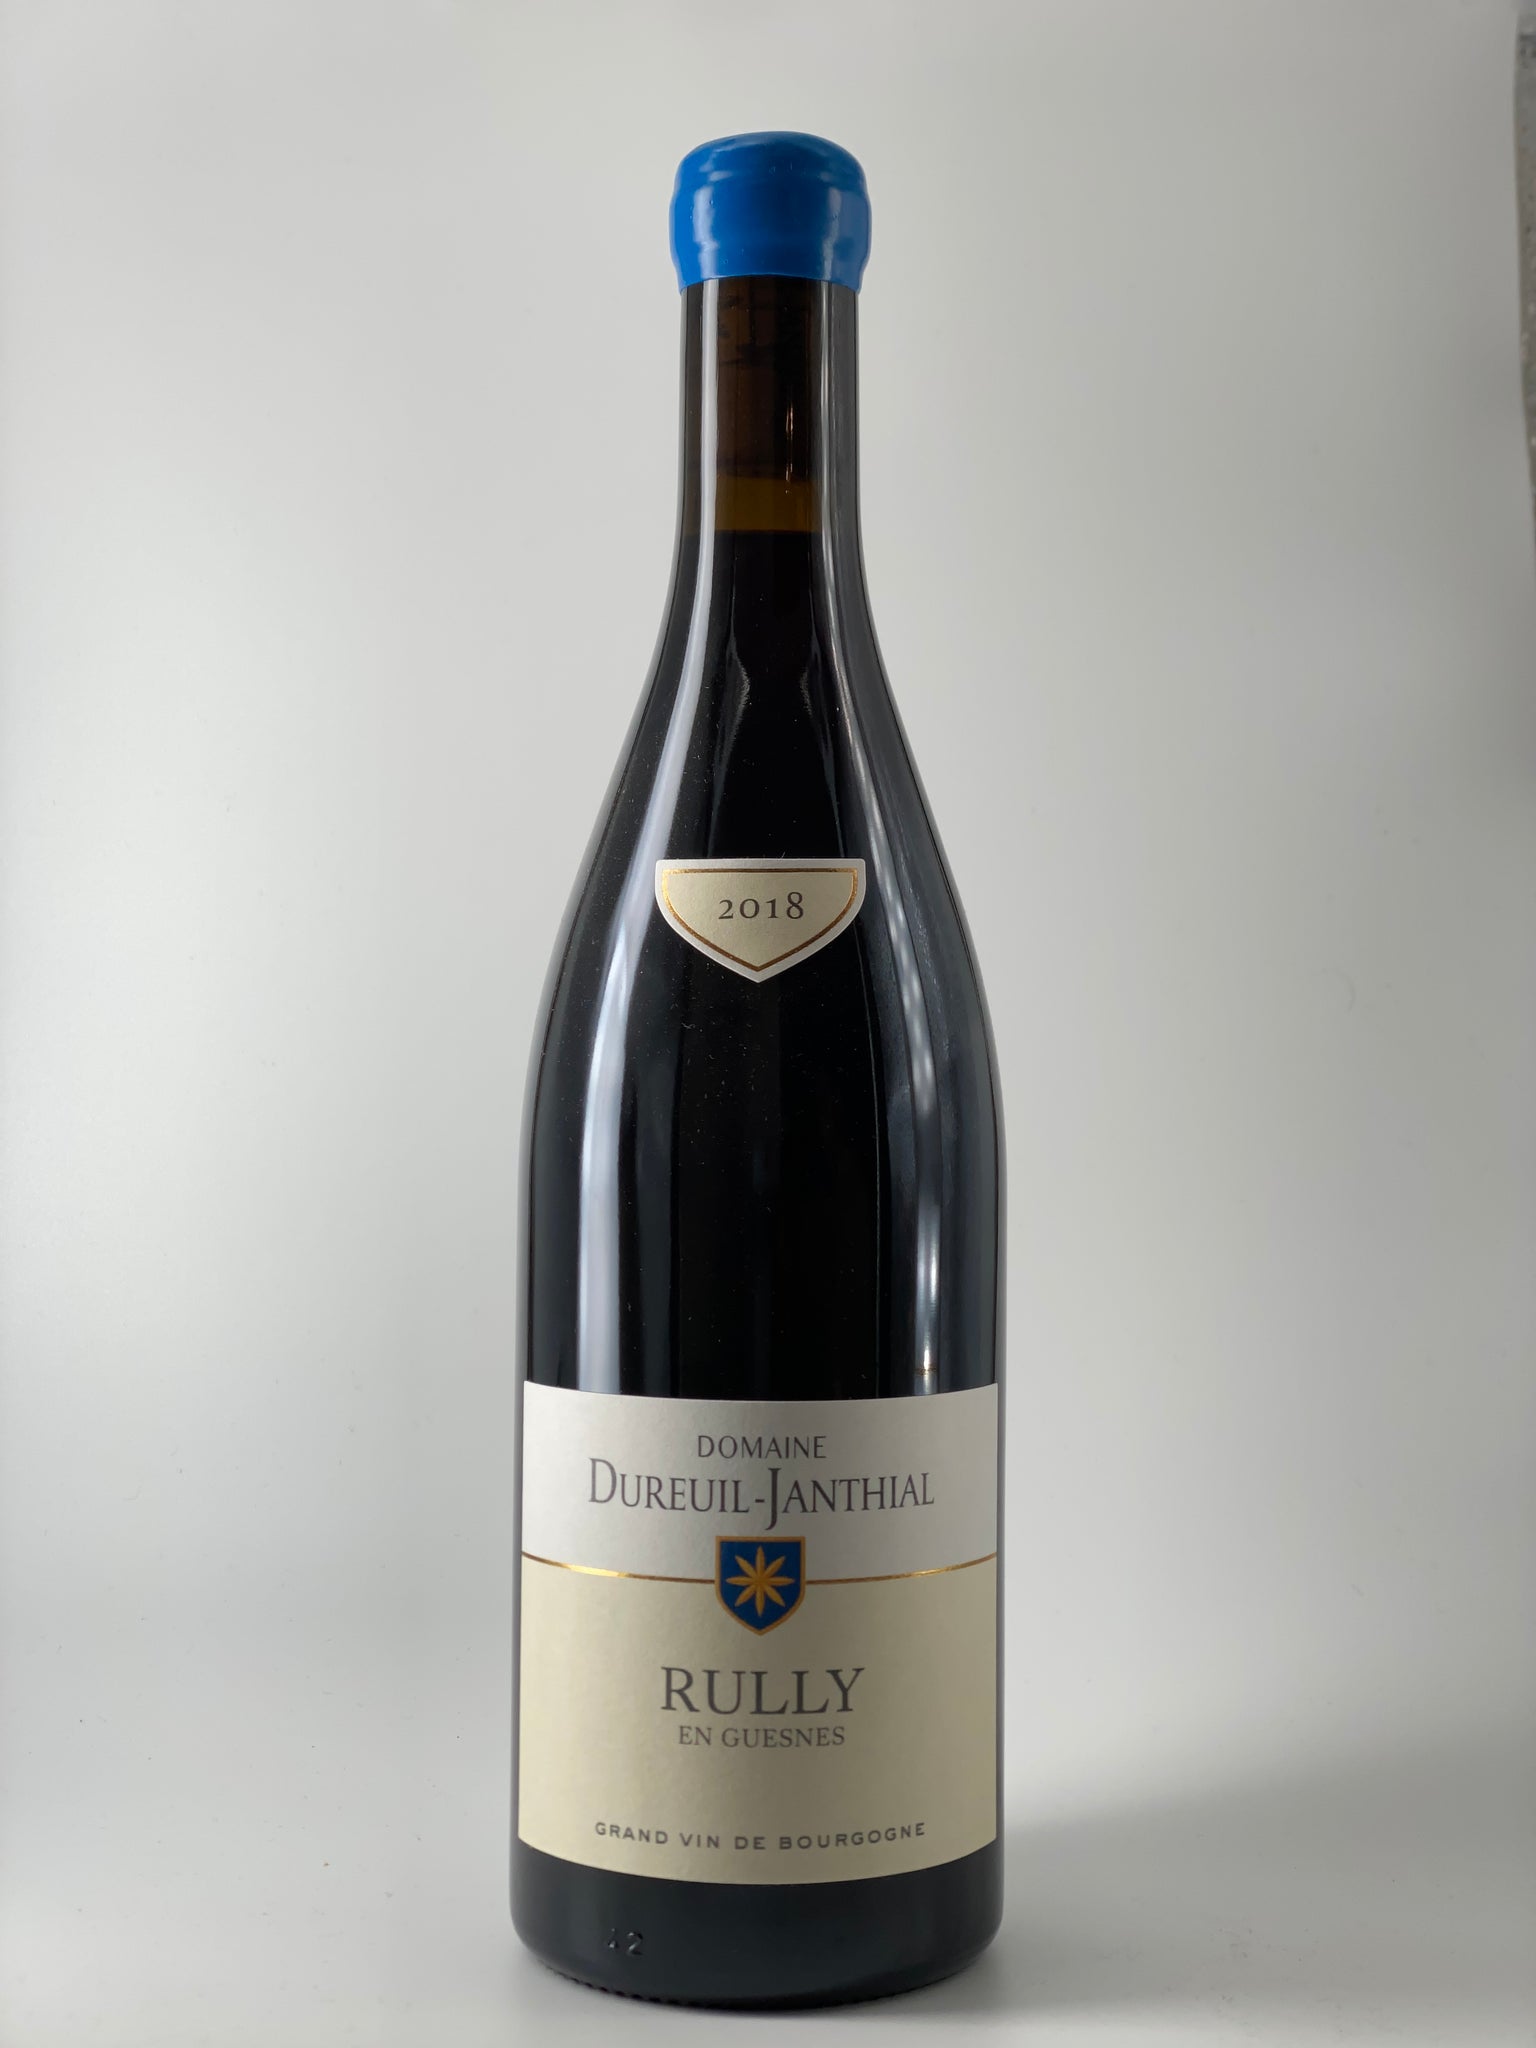 Burgundy, Domaine Vincent Dureuil-Janthial Rully